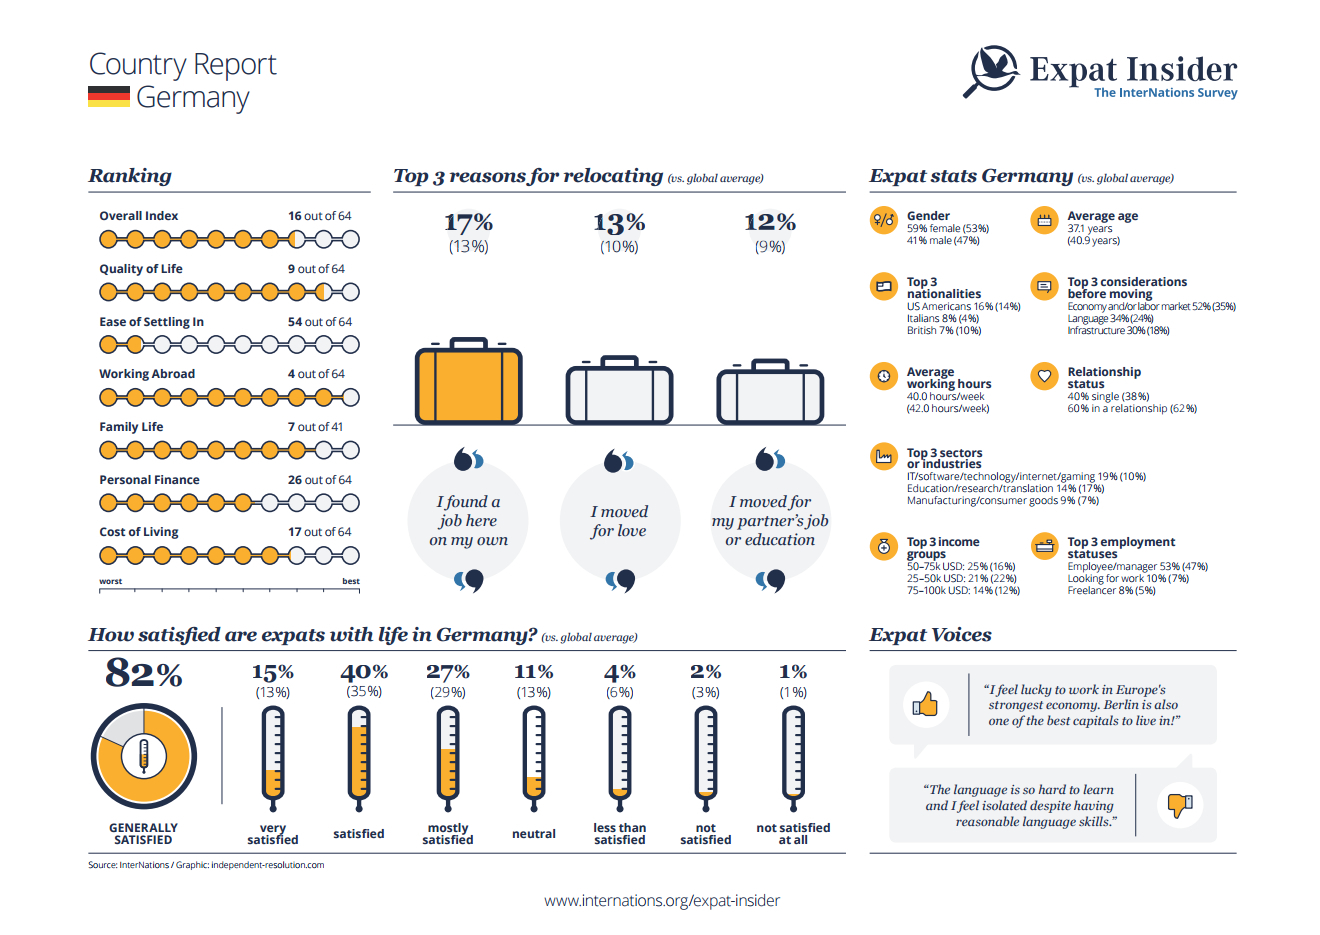 Expat statistics for Germany - infographic